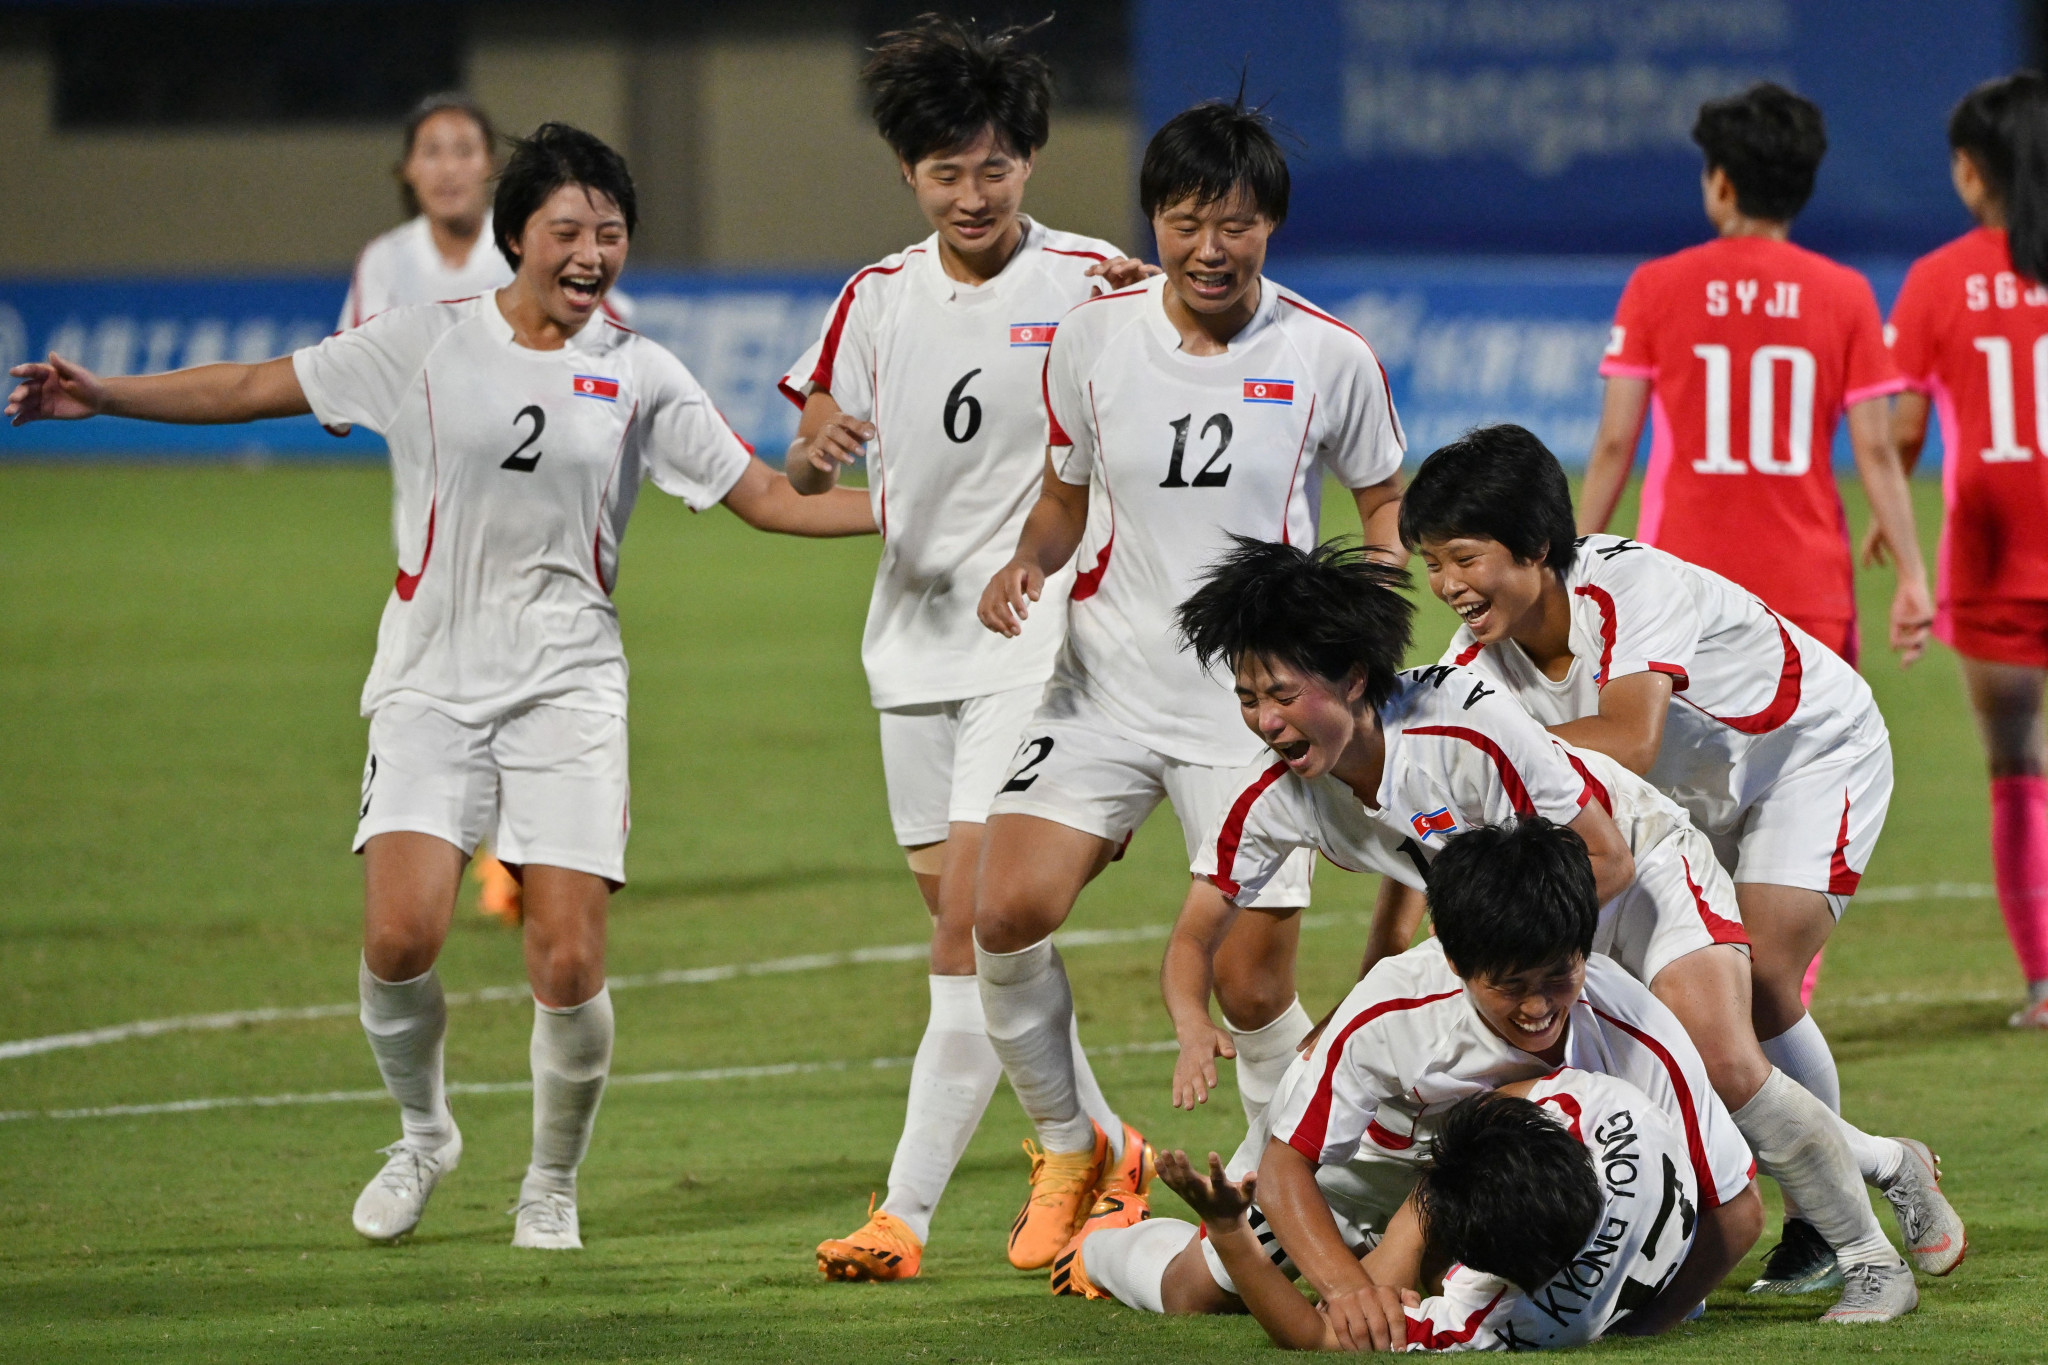 North Korea overpowered 10-player South Korea to book their place in the semi-finals of the women's football tournament in Hangzhou ©Getty Images